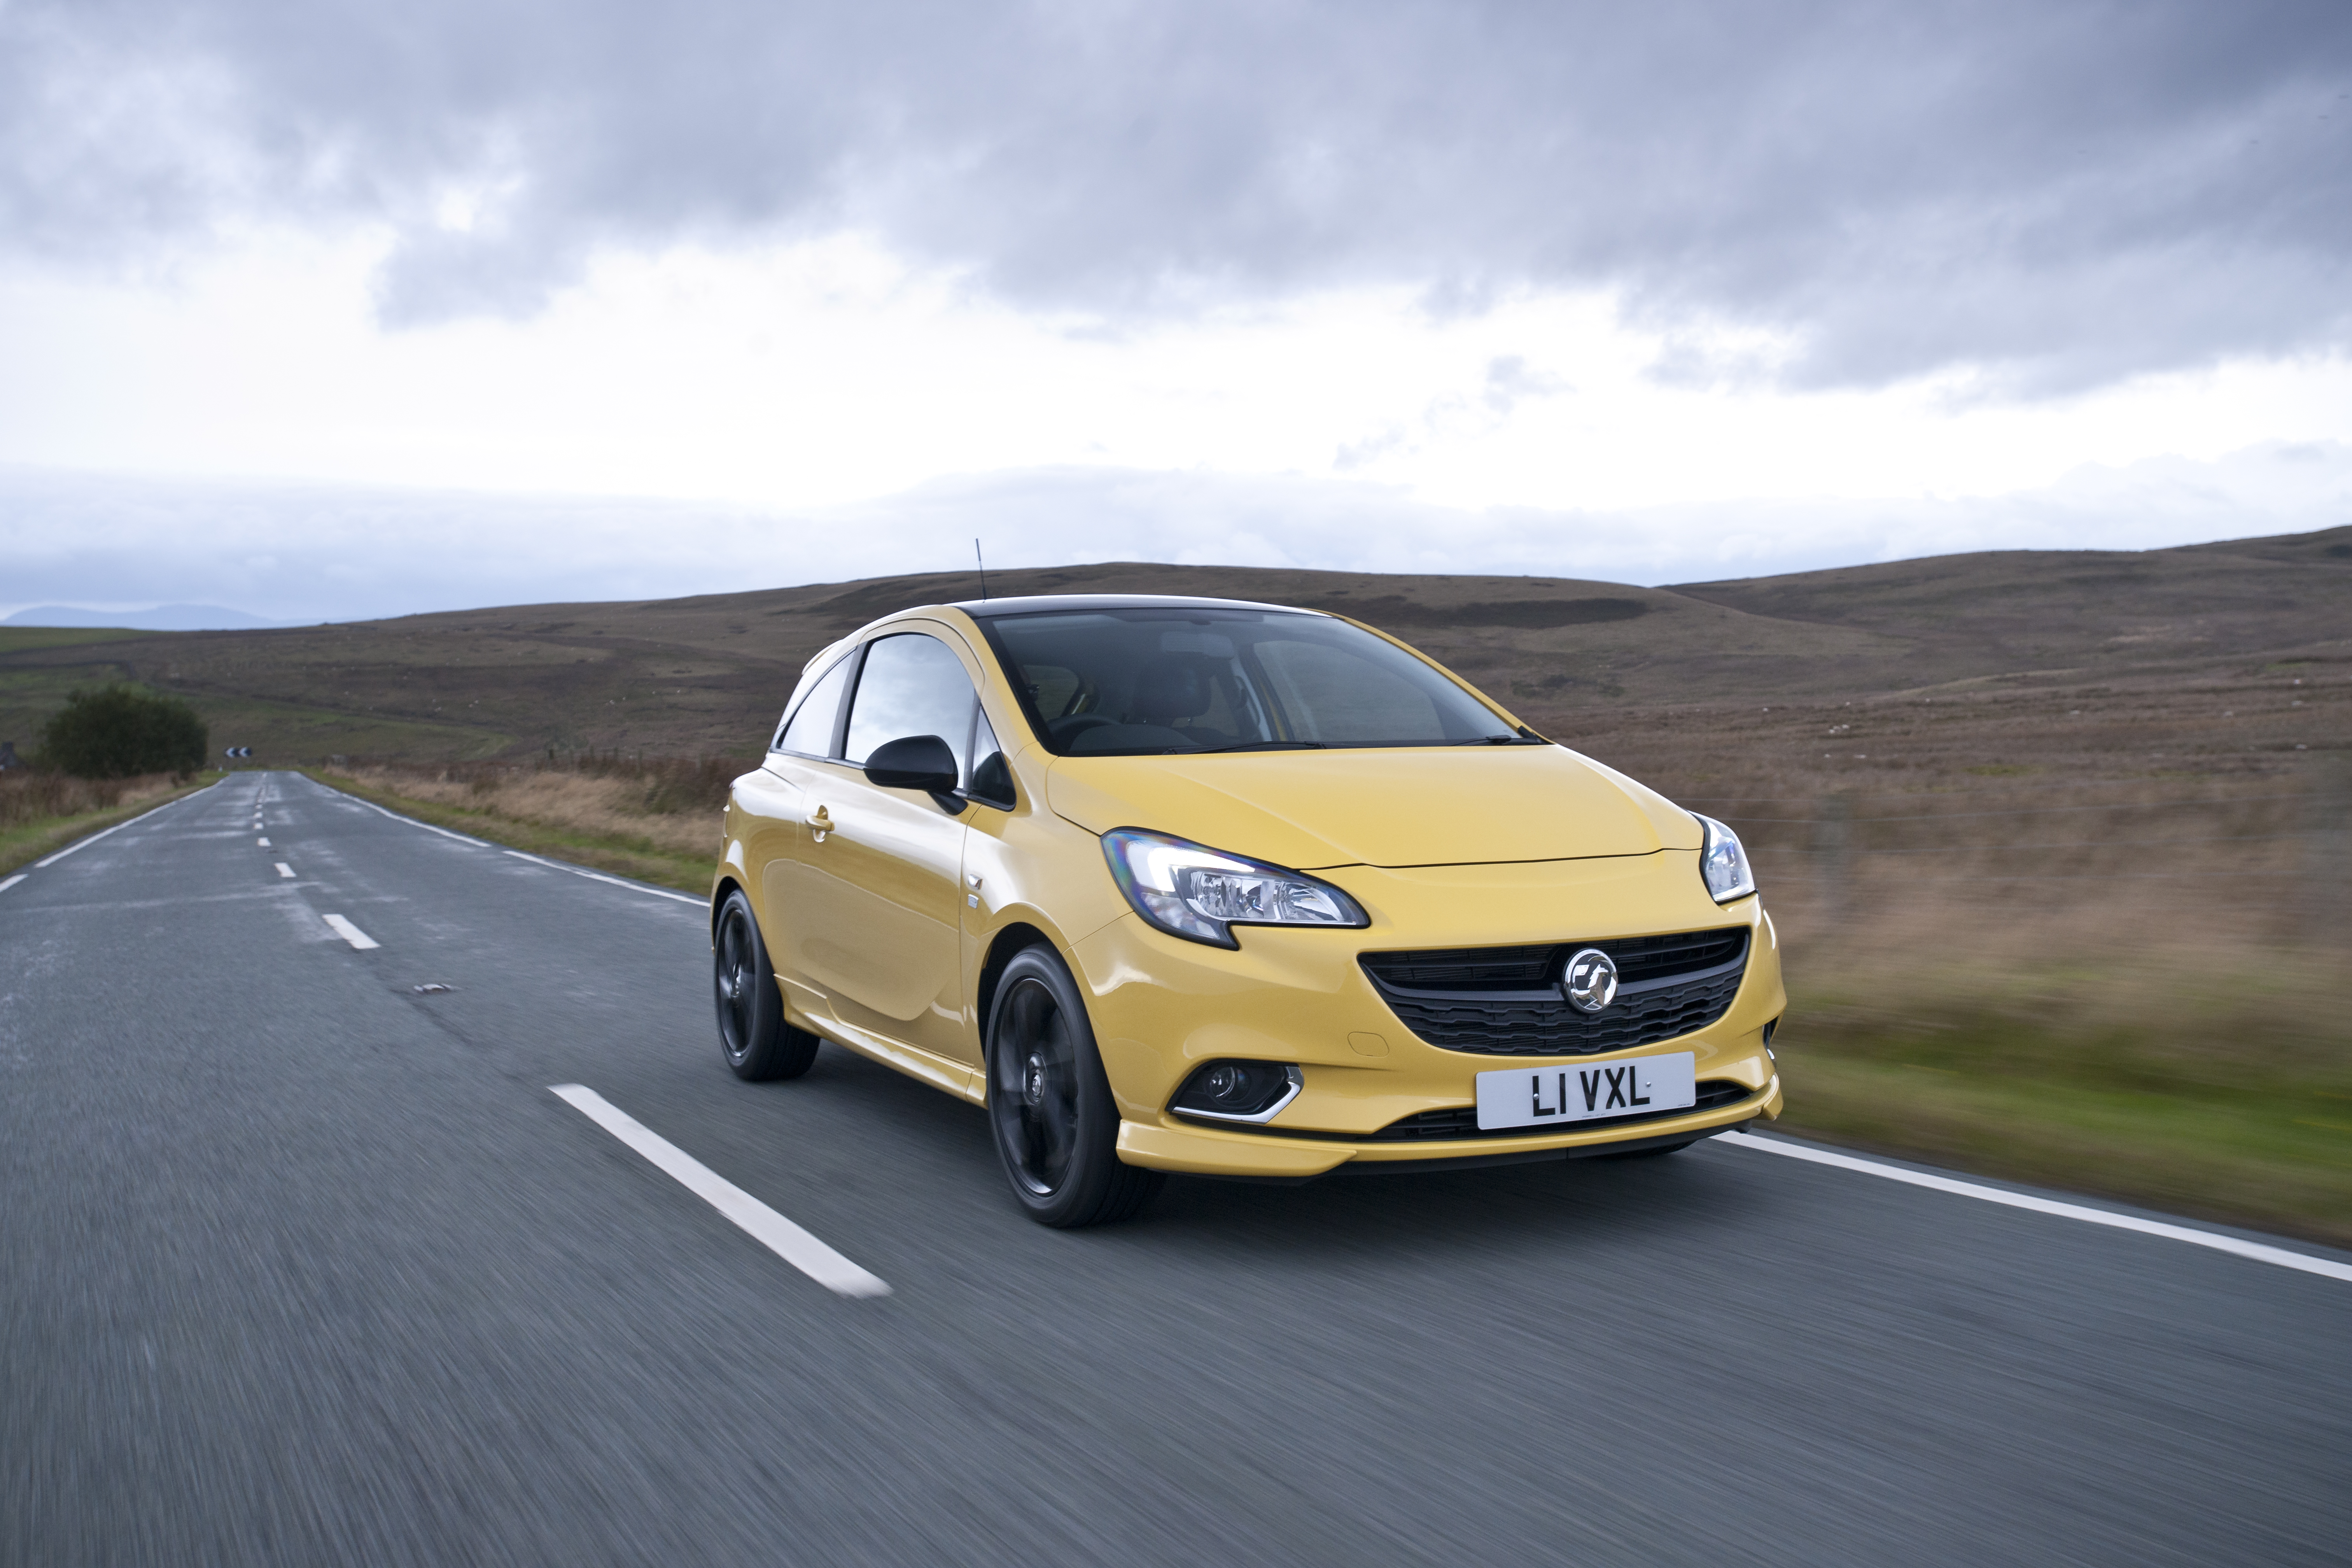 Vauxhall Corsa's are incredibly popular in the UK